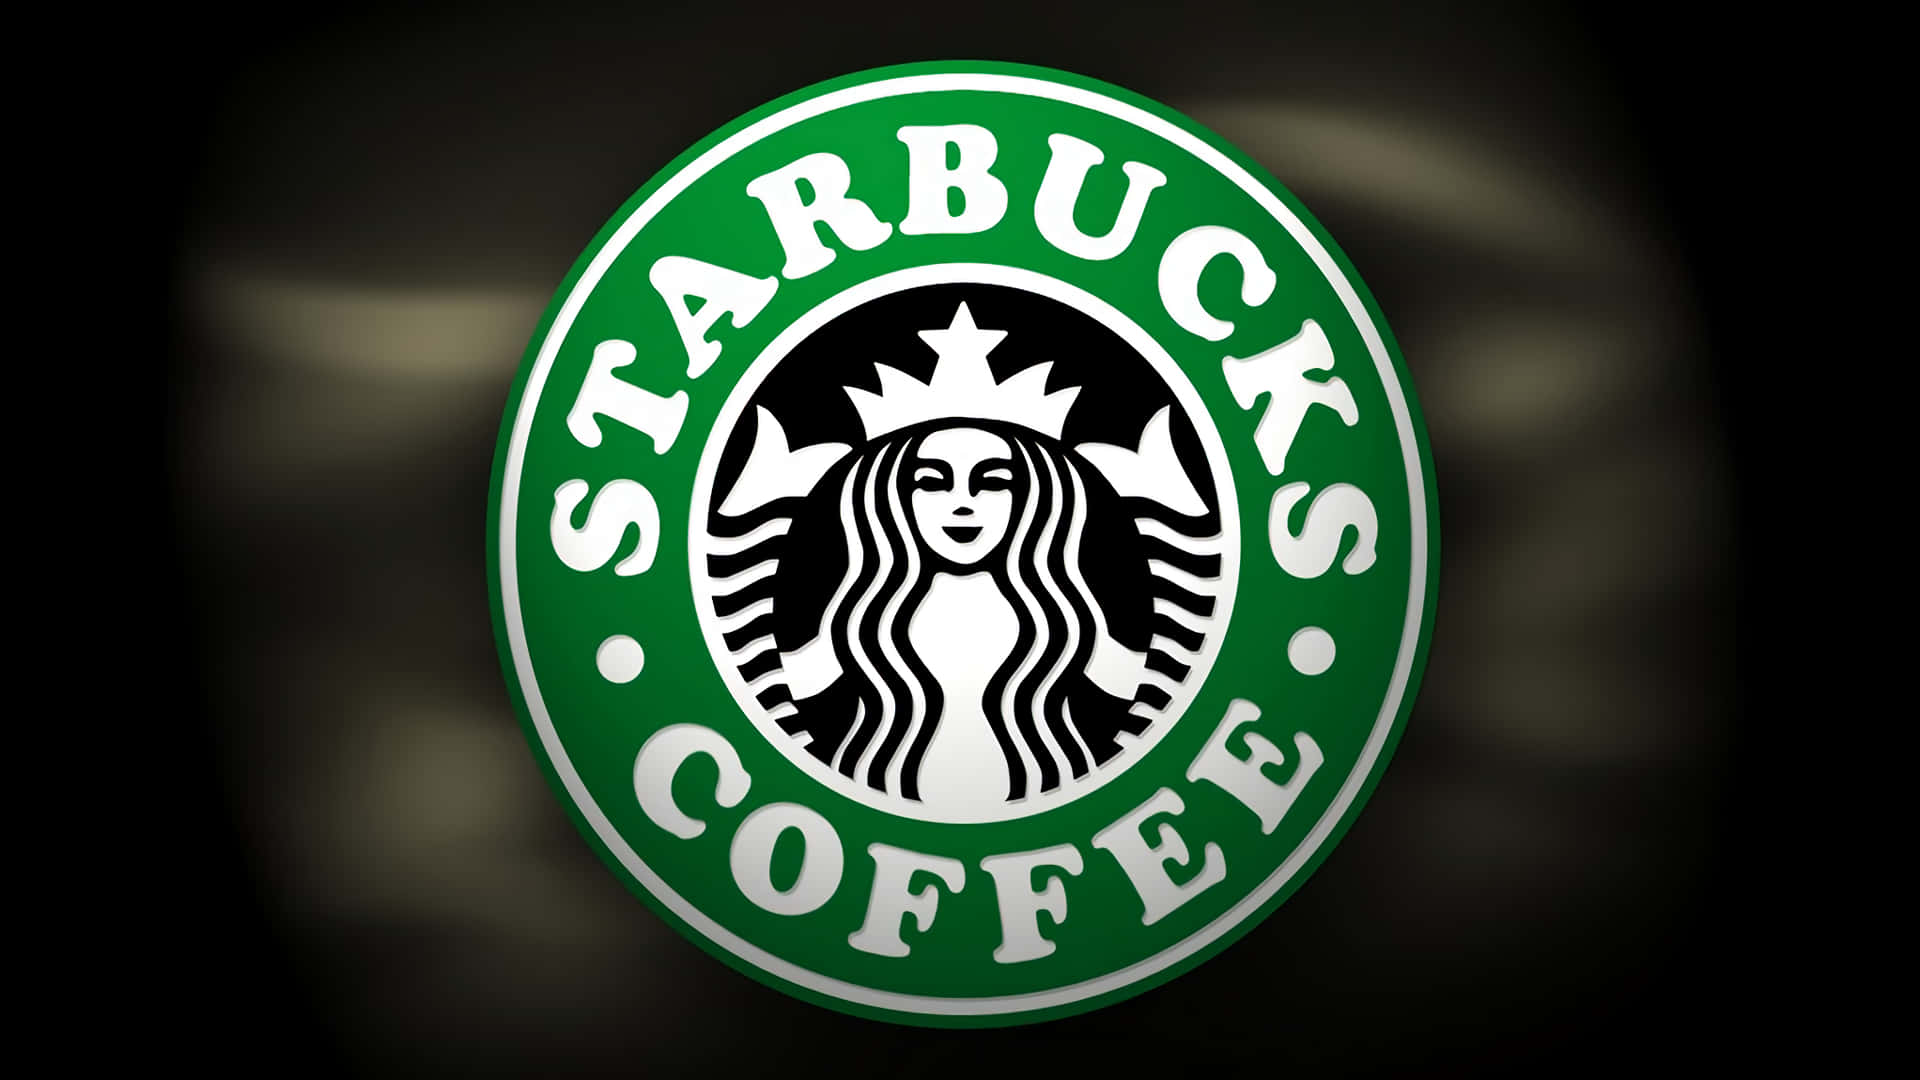 Enjoy the invigorating and delicious experience of Starbucks